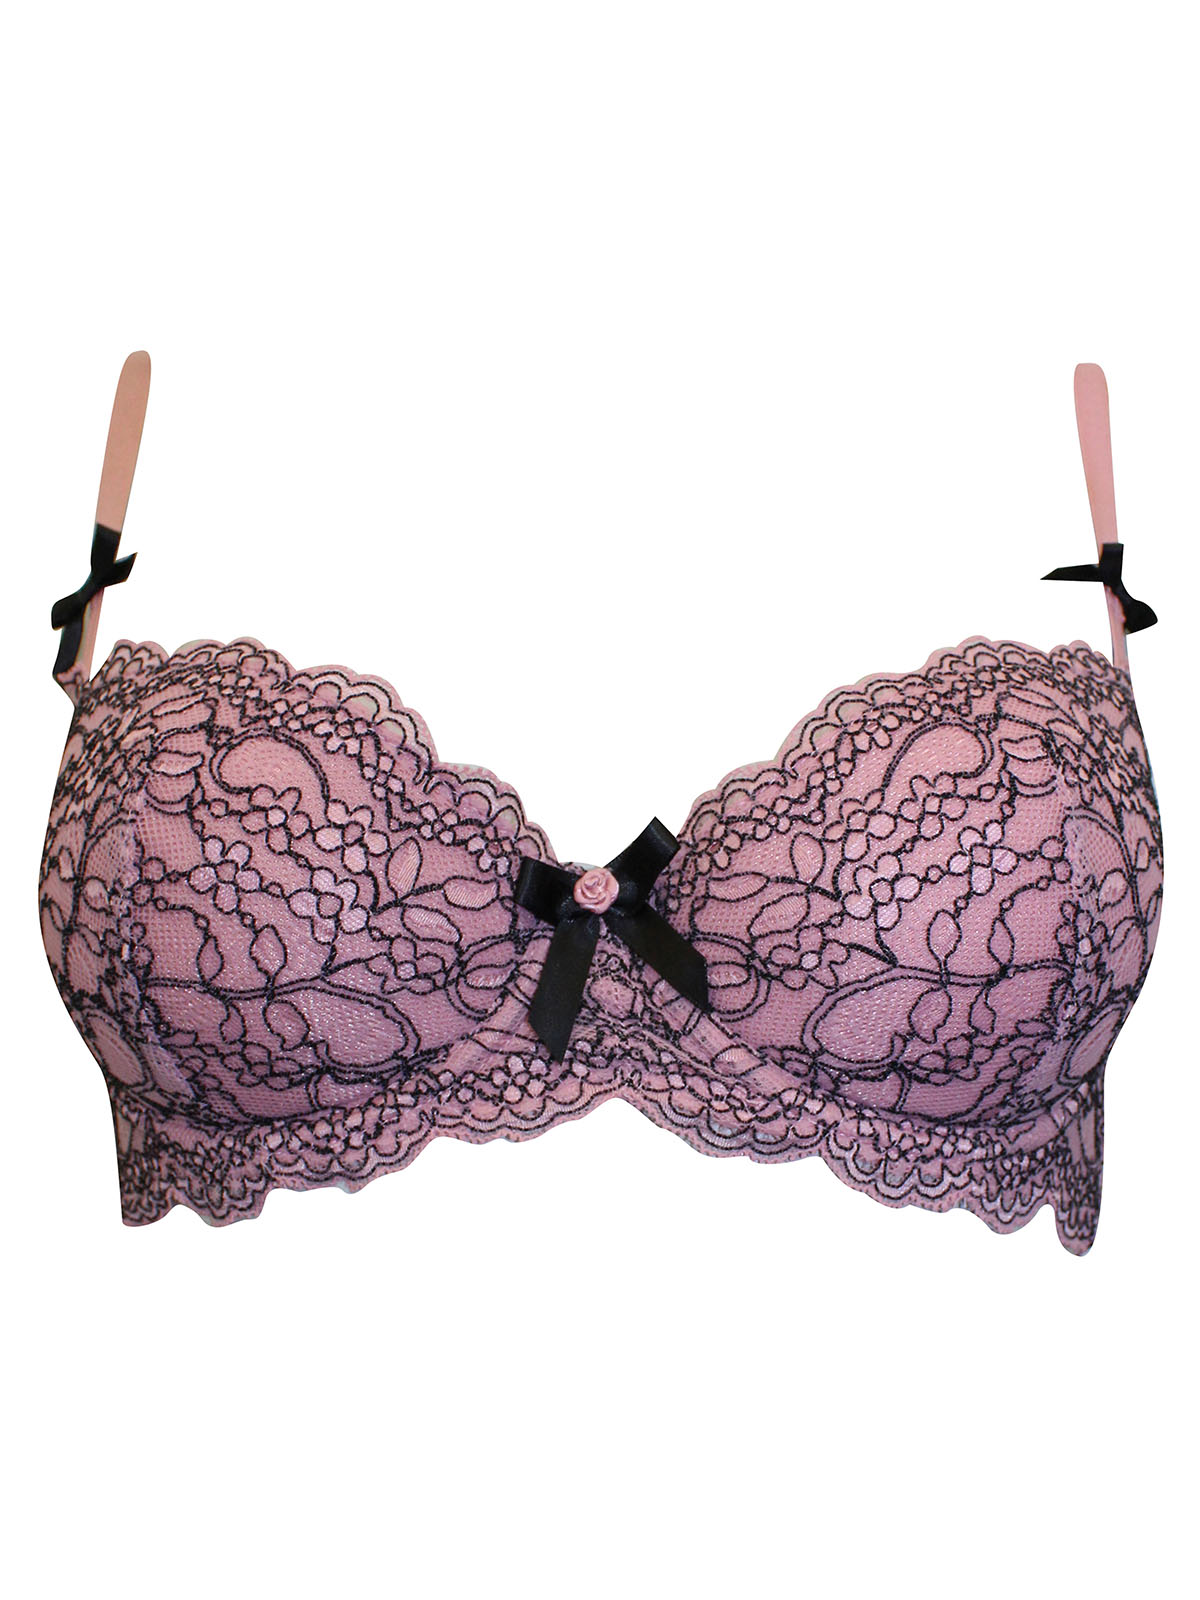 Daisy Fuentes 36 D Push Up Womens Long Line Bra Pink and Black Underwire  Lace